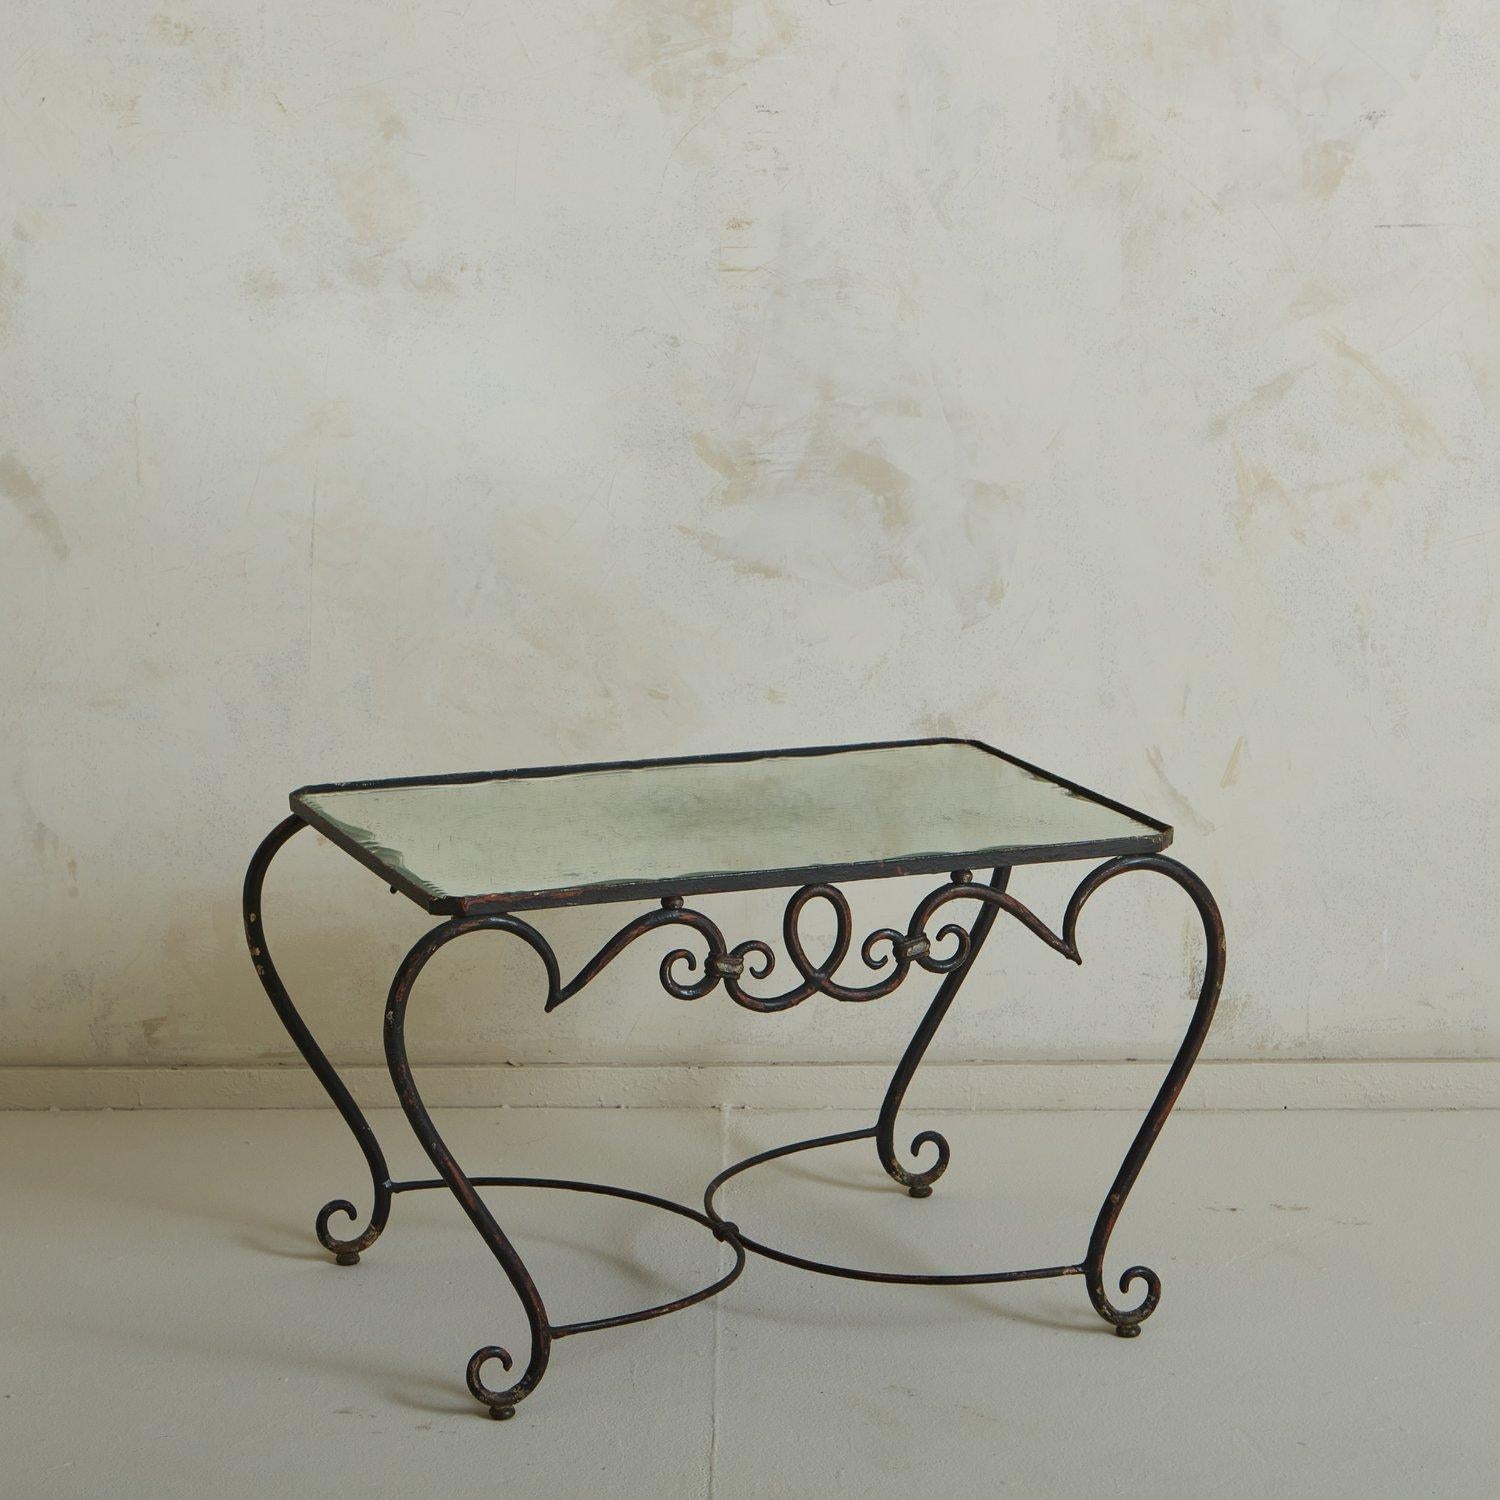 A 1940s French coffee table in the style of Rene Prou. This table features a wrought iron base with dramatically curved legs and curl details. It has an inset mirrored glass tabletop. Sourced in France, 1940s.